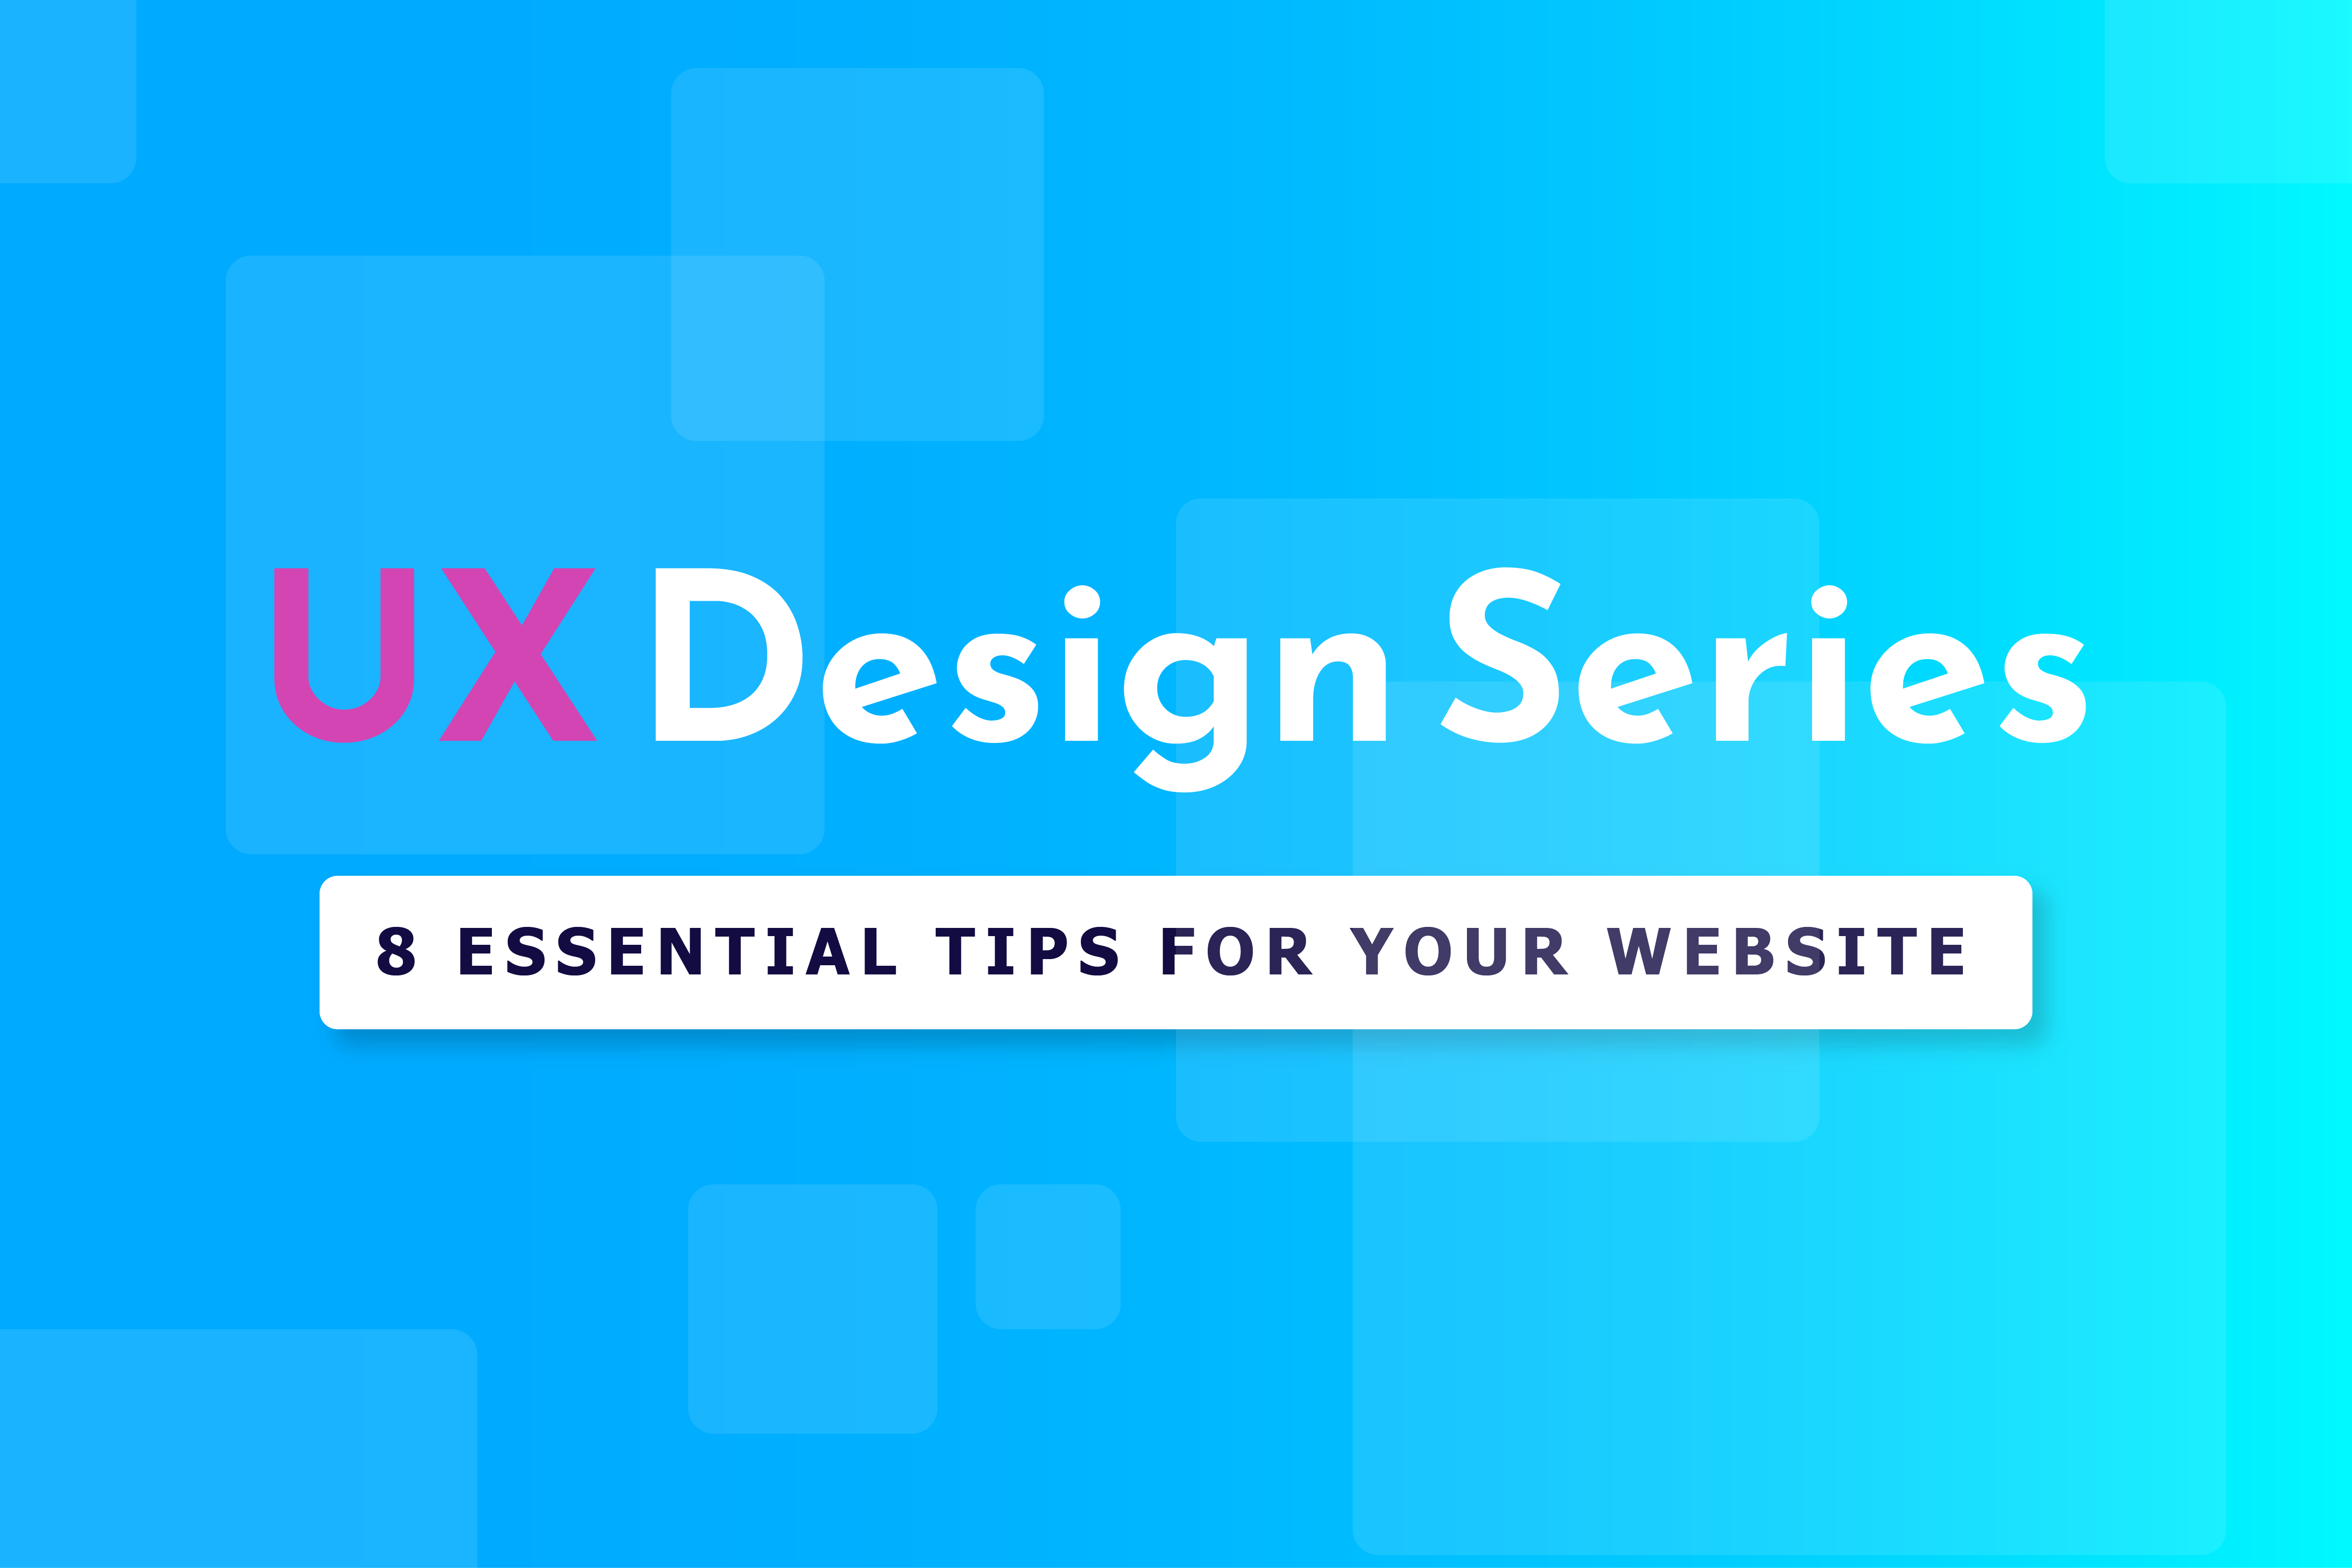 Improve On-page Conversions | 8 UX Design Tips | webspider